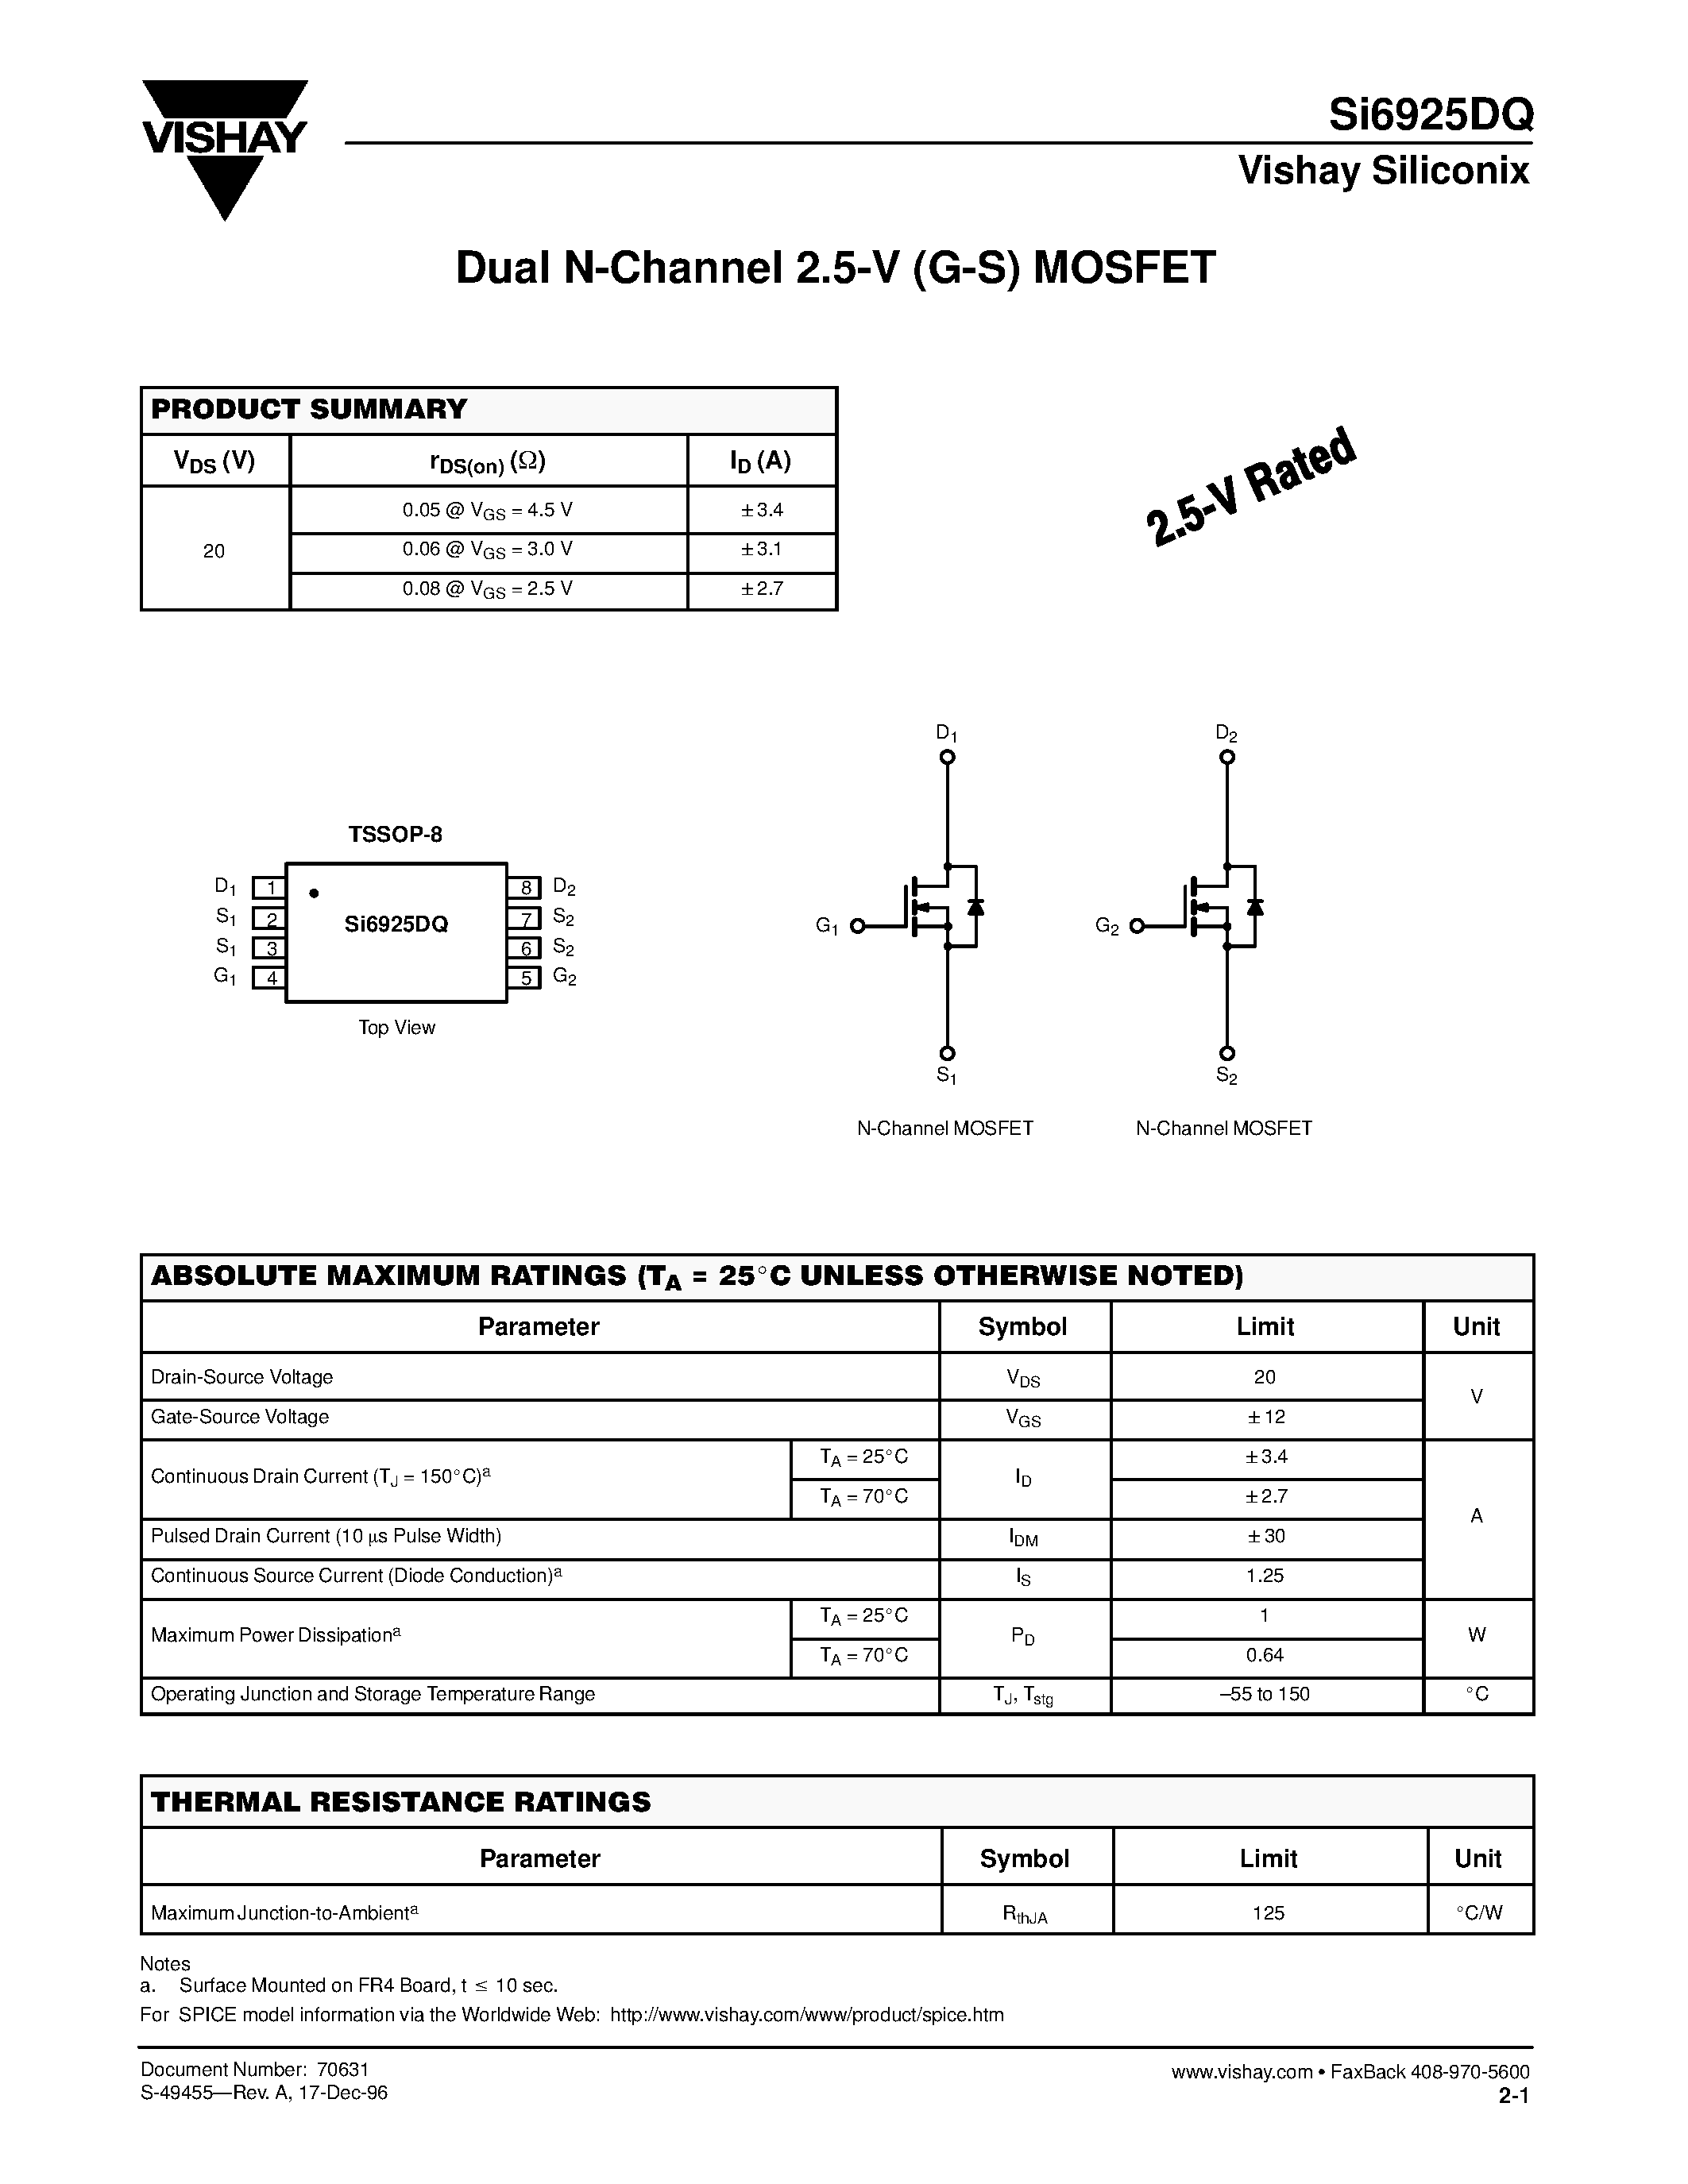 Datasheet SI6925DQ - Dual N-Channel 2.5-V (G-S) MOSFET page 1